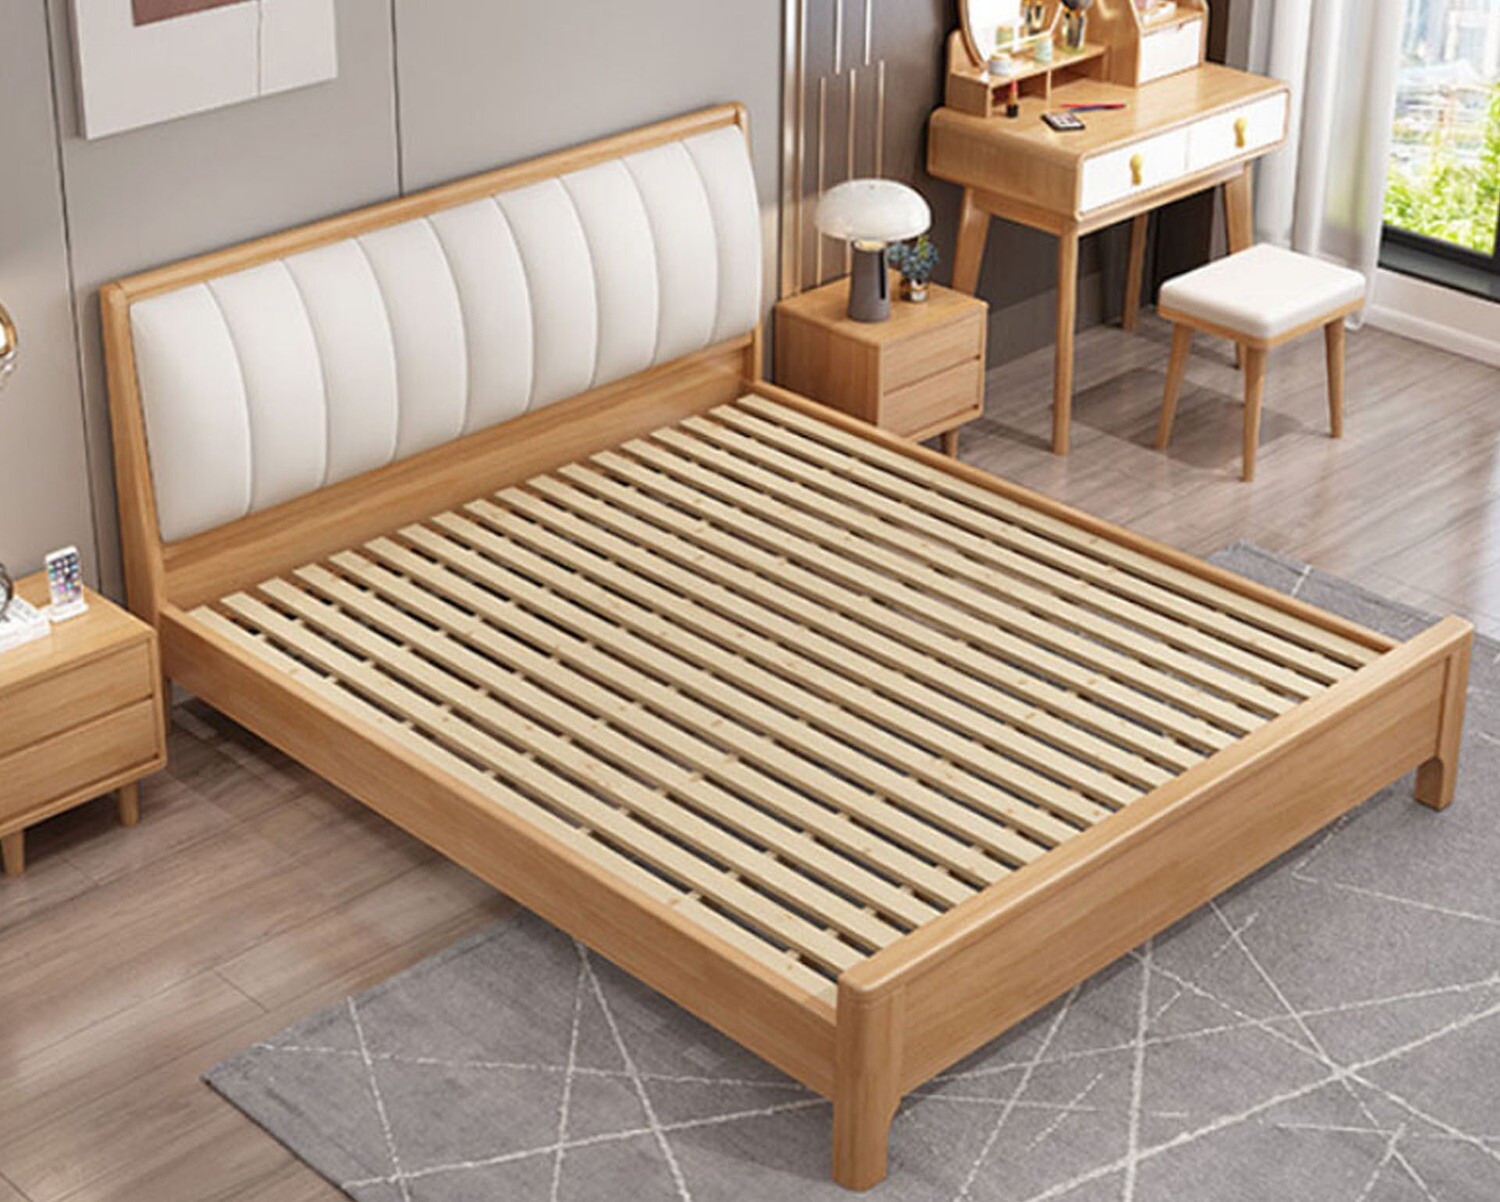 Flotti Kavala Solid Thailand Rubberwood Bed Frame (Queen) (Side Drawers Are Not Included)